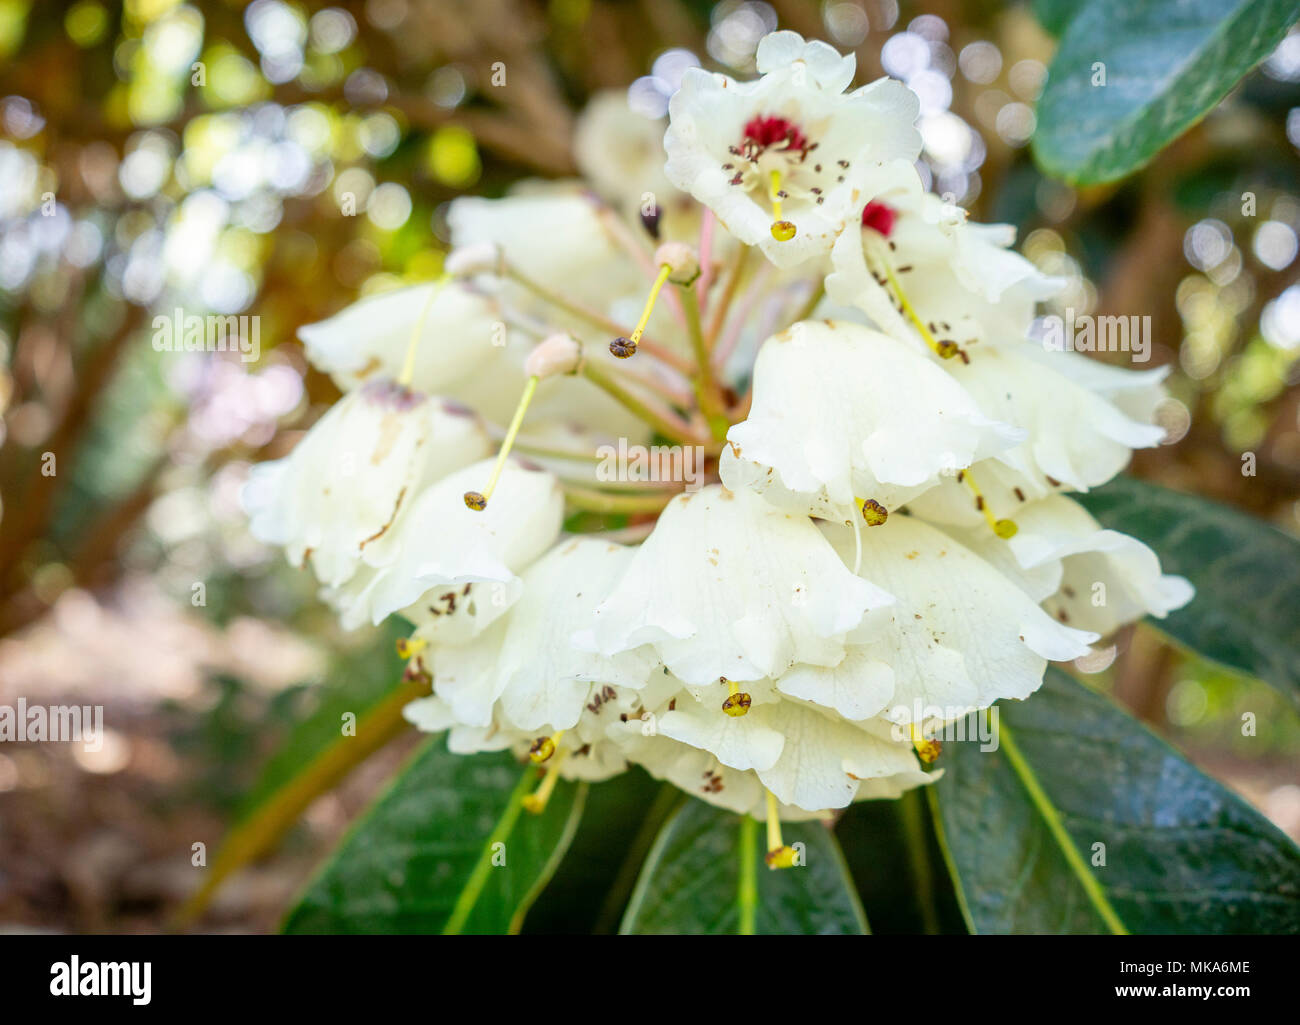 White flower trusses of a Rhododendron 'Fortune' (hybrid of a R. falconeri) a hardy evergreen shrub during May in Exbury gardens, Hampshire, UK Stock Photo